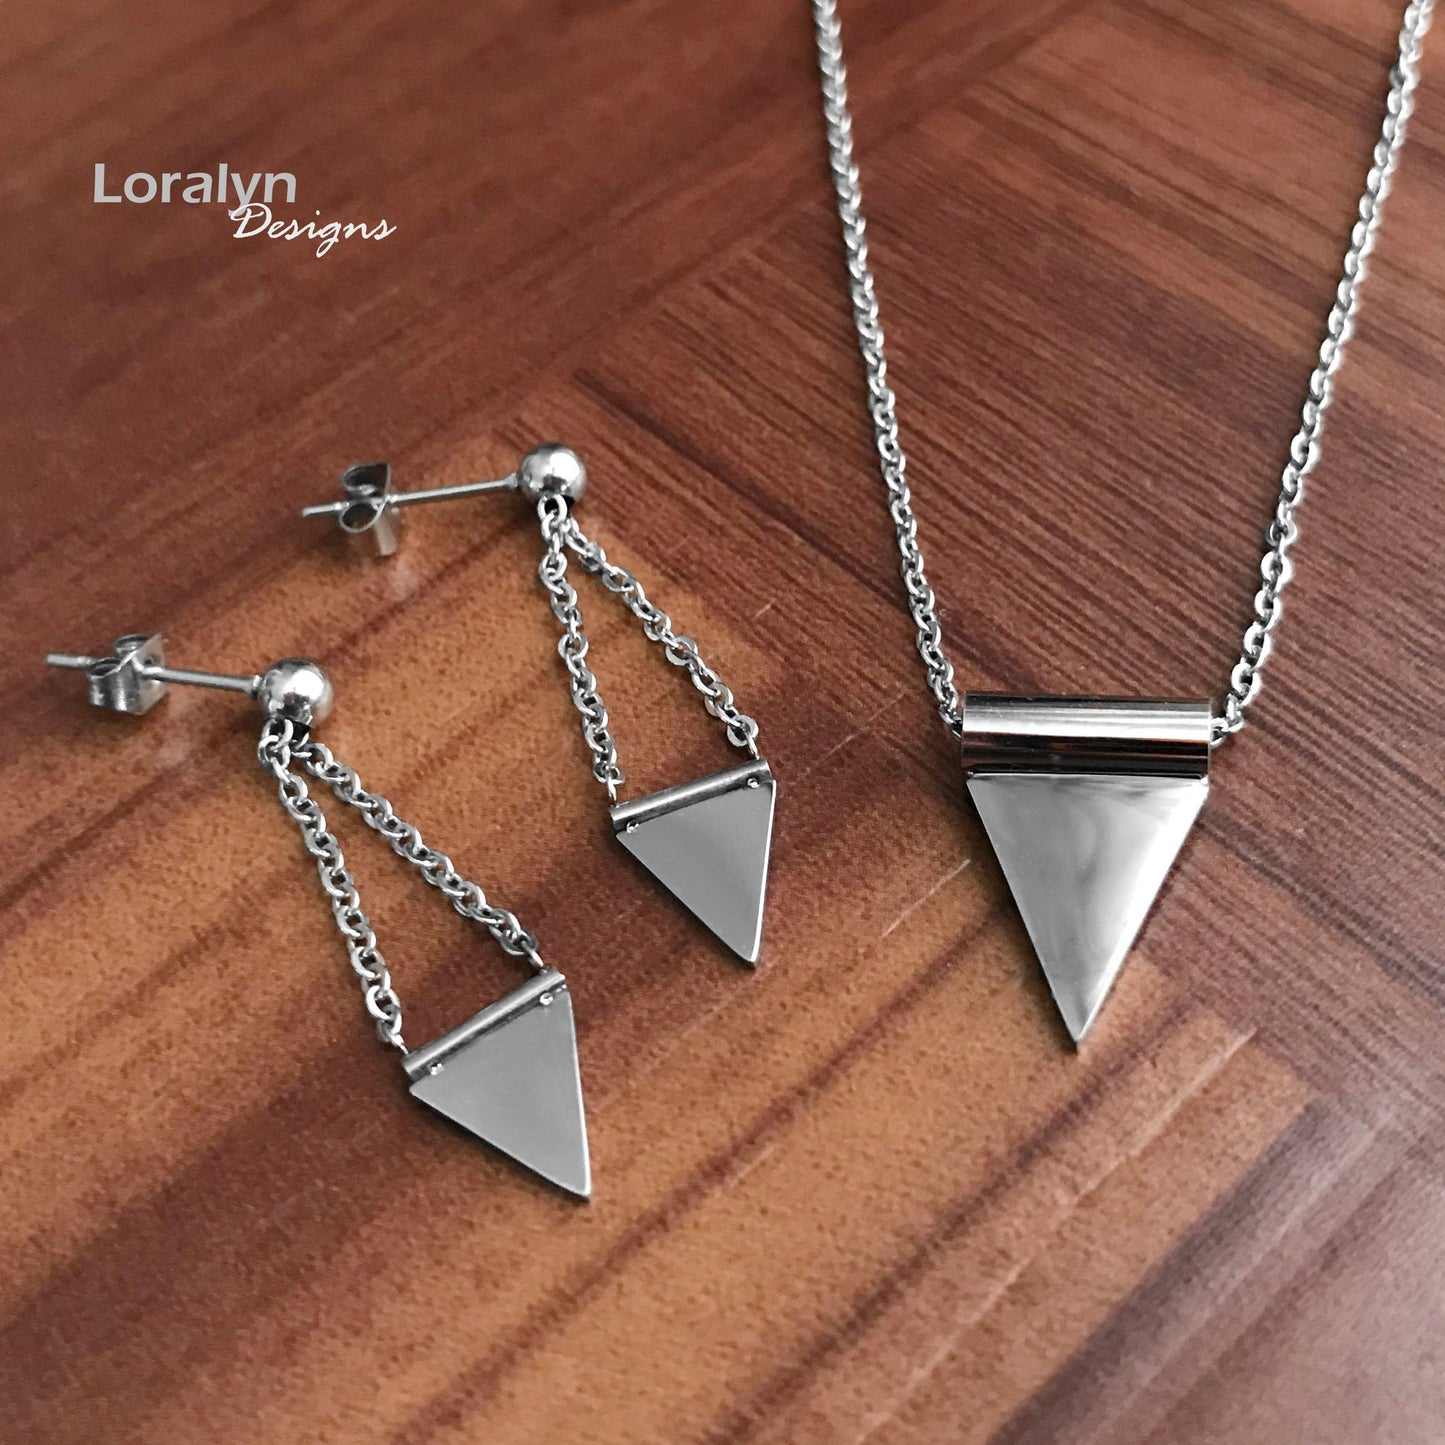 Small Stainless Steel Simple Triangle Necklace, Feminine Symbol, Spike Necklace, Minimalist Style, Gift for Fashionista